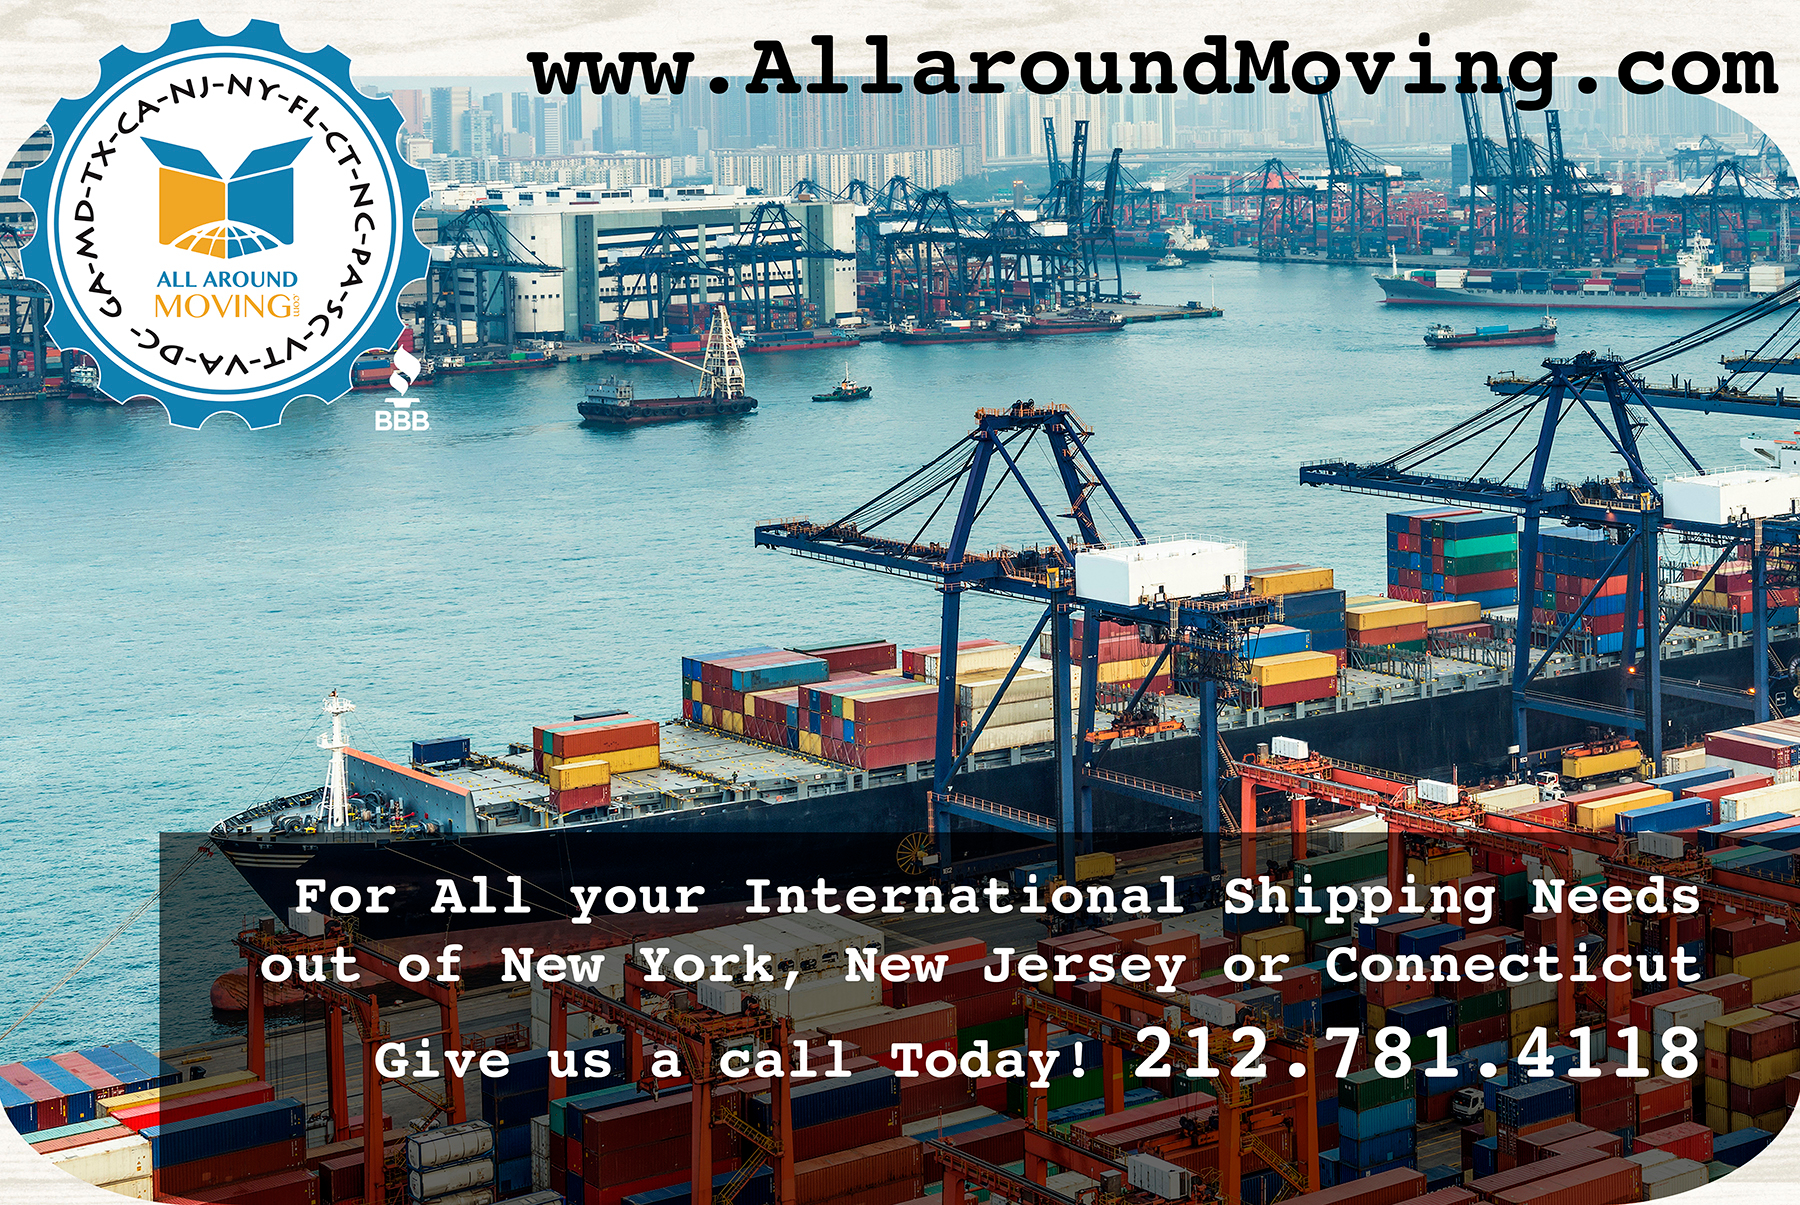 International Overseas Shipping or Moving Services www.AllaroundMoving.com 212-781-4118